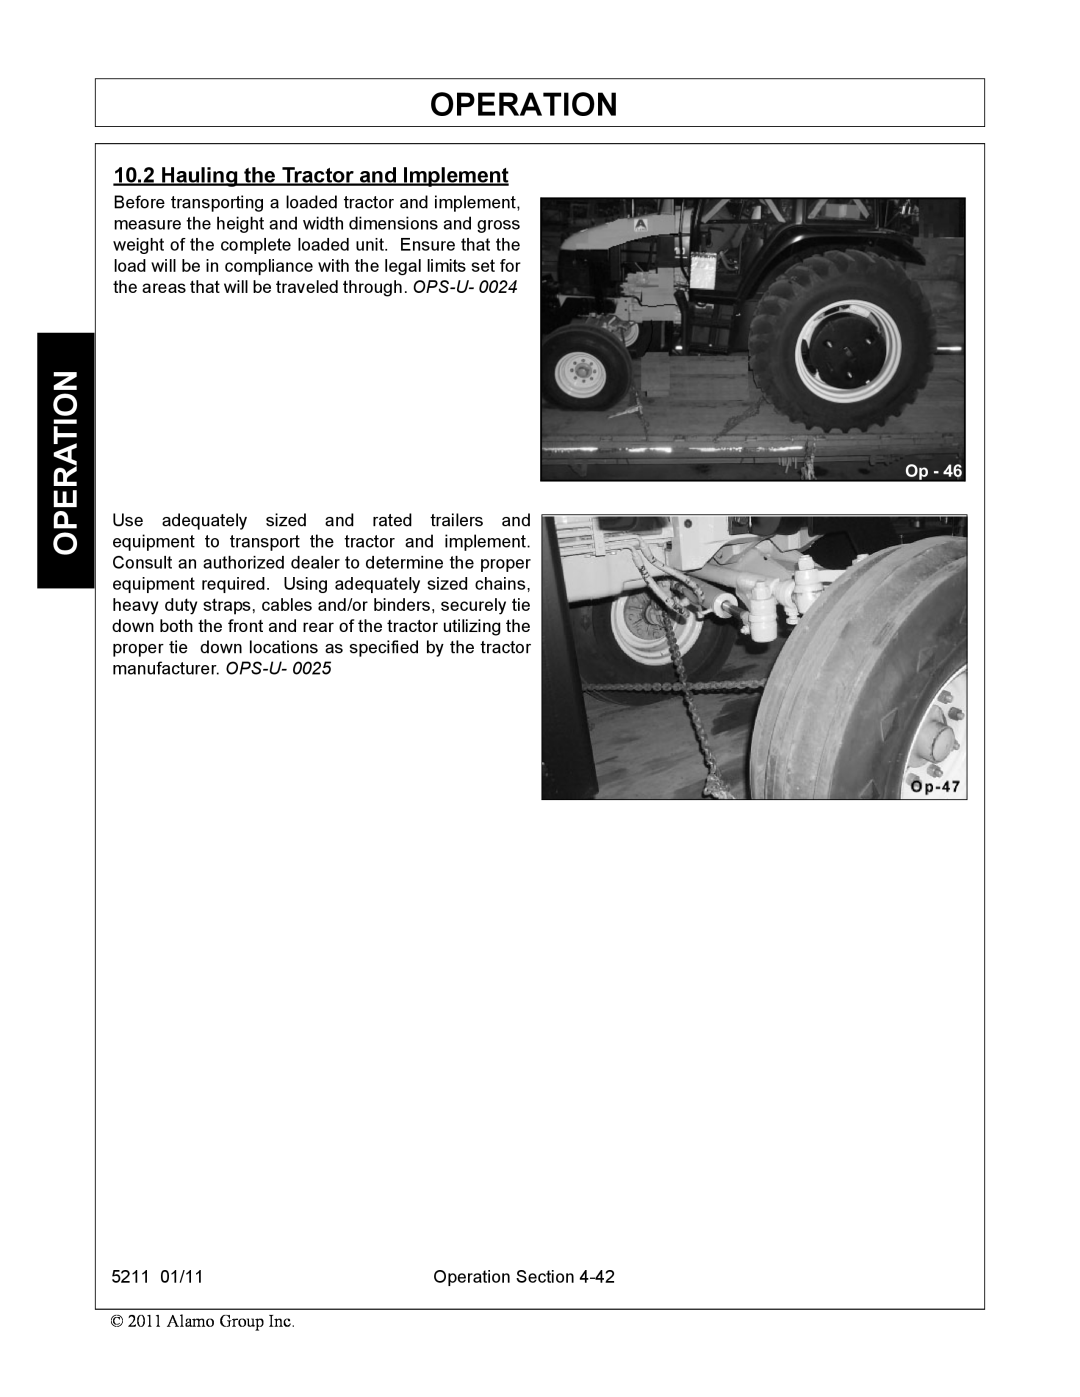 Servis-Rhino 5211 manual Operation, Hauling the Tractor and Implement 